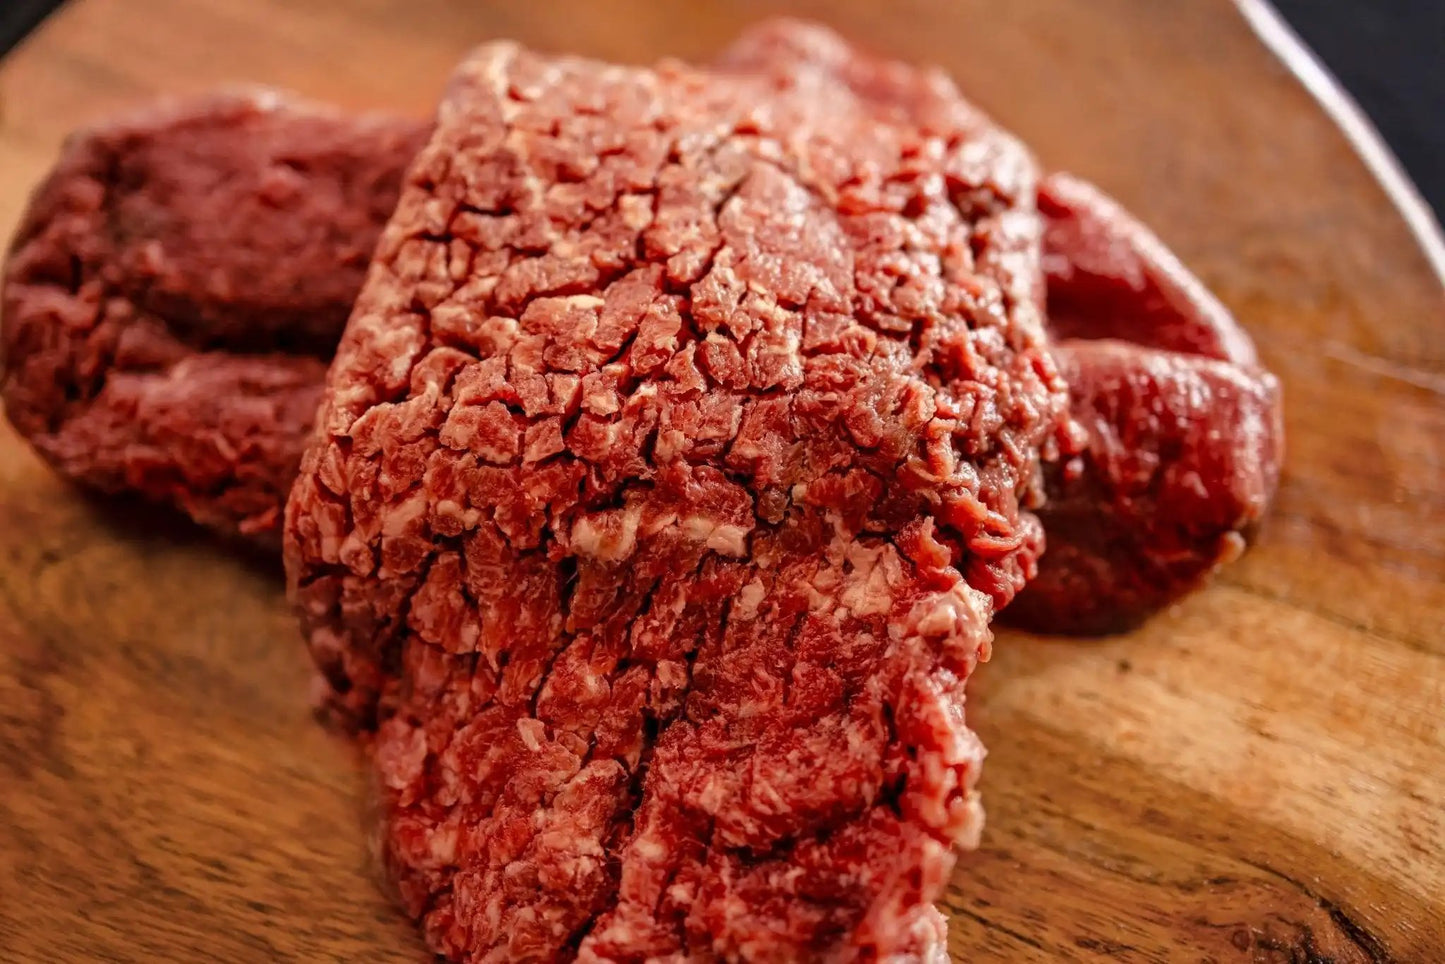 Grass-Fed Pasture-Raised Wagyu or Angus Winter Comfort Beef BundleThe Grass-fed Down Home Comfort Beef Bundle is a collection of premium Wagyu or Angus beef cuts that are perfect for creating comforting and delicious meals that theGrass-Fed Pasture-Raised WagyuThe Hufeisen-Ranch (WYO Wagyu)